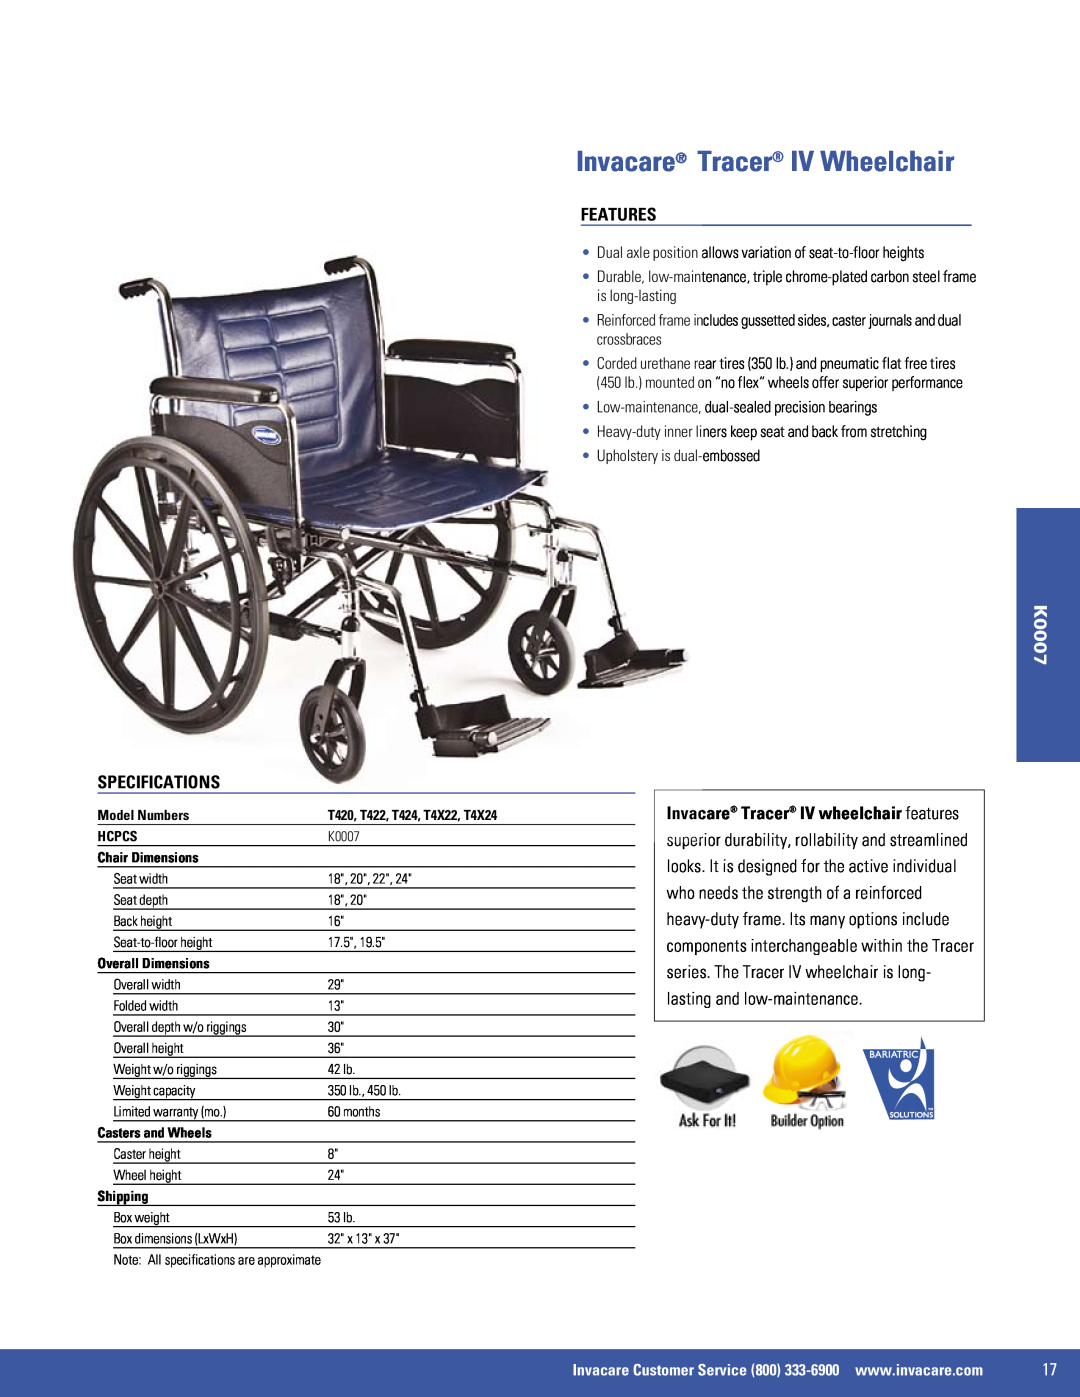 Invacare 9000 SL, 9000 XT, SX5 Invacare Tracer IV Wheelchair, Features, Specifications, K0007, Upholstery is dual-embossed 